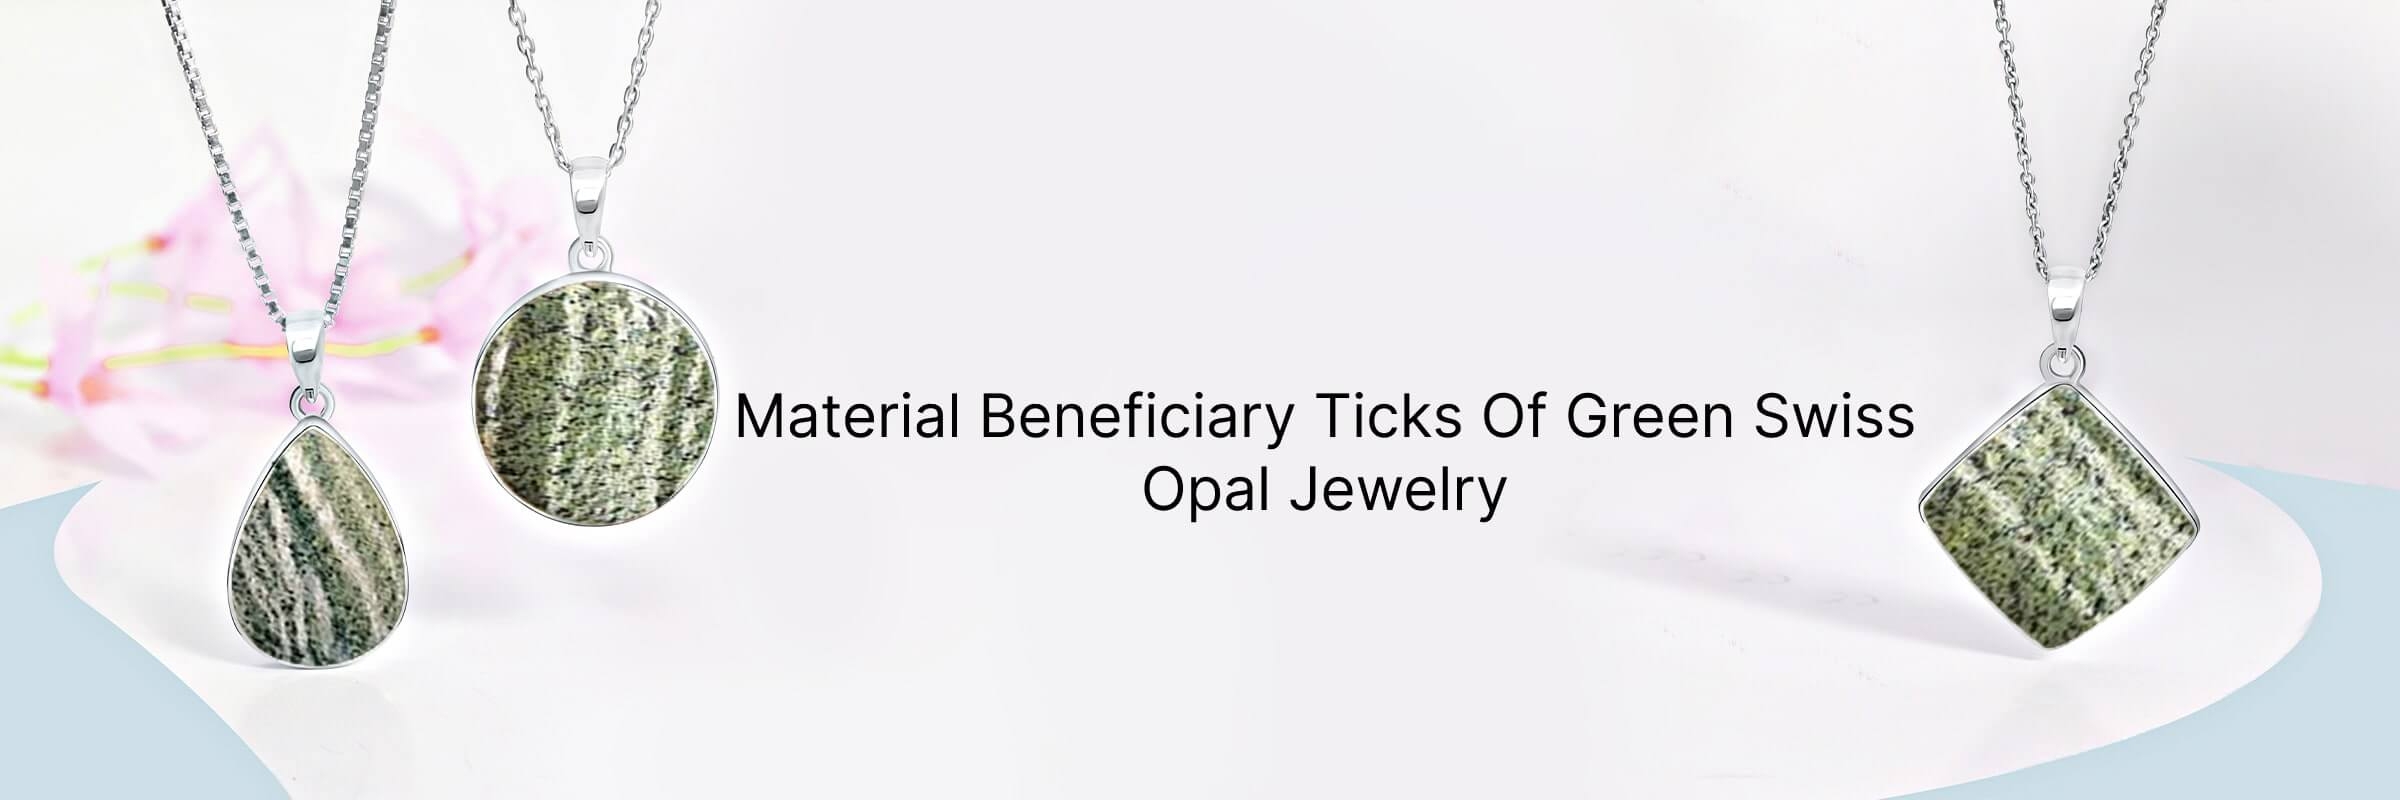 Physical Properties of Green Swiss Opal Jewelry